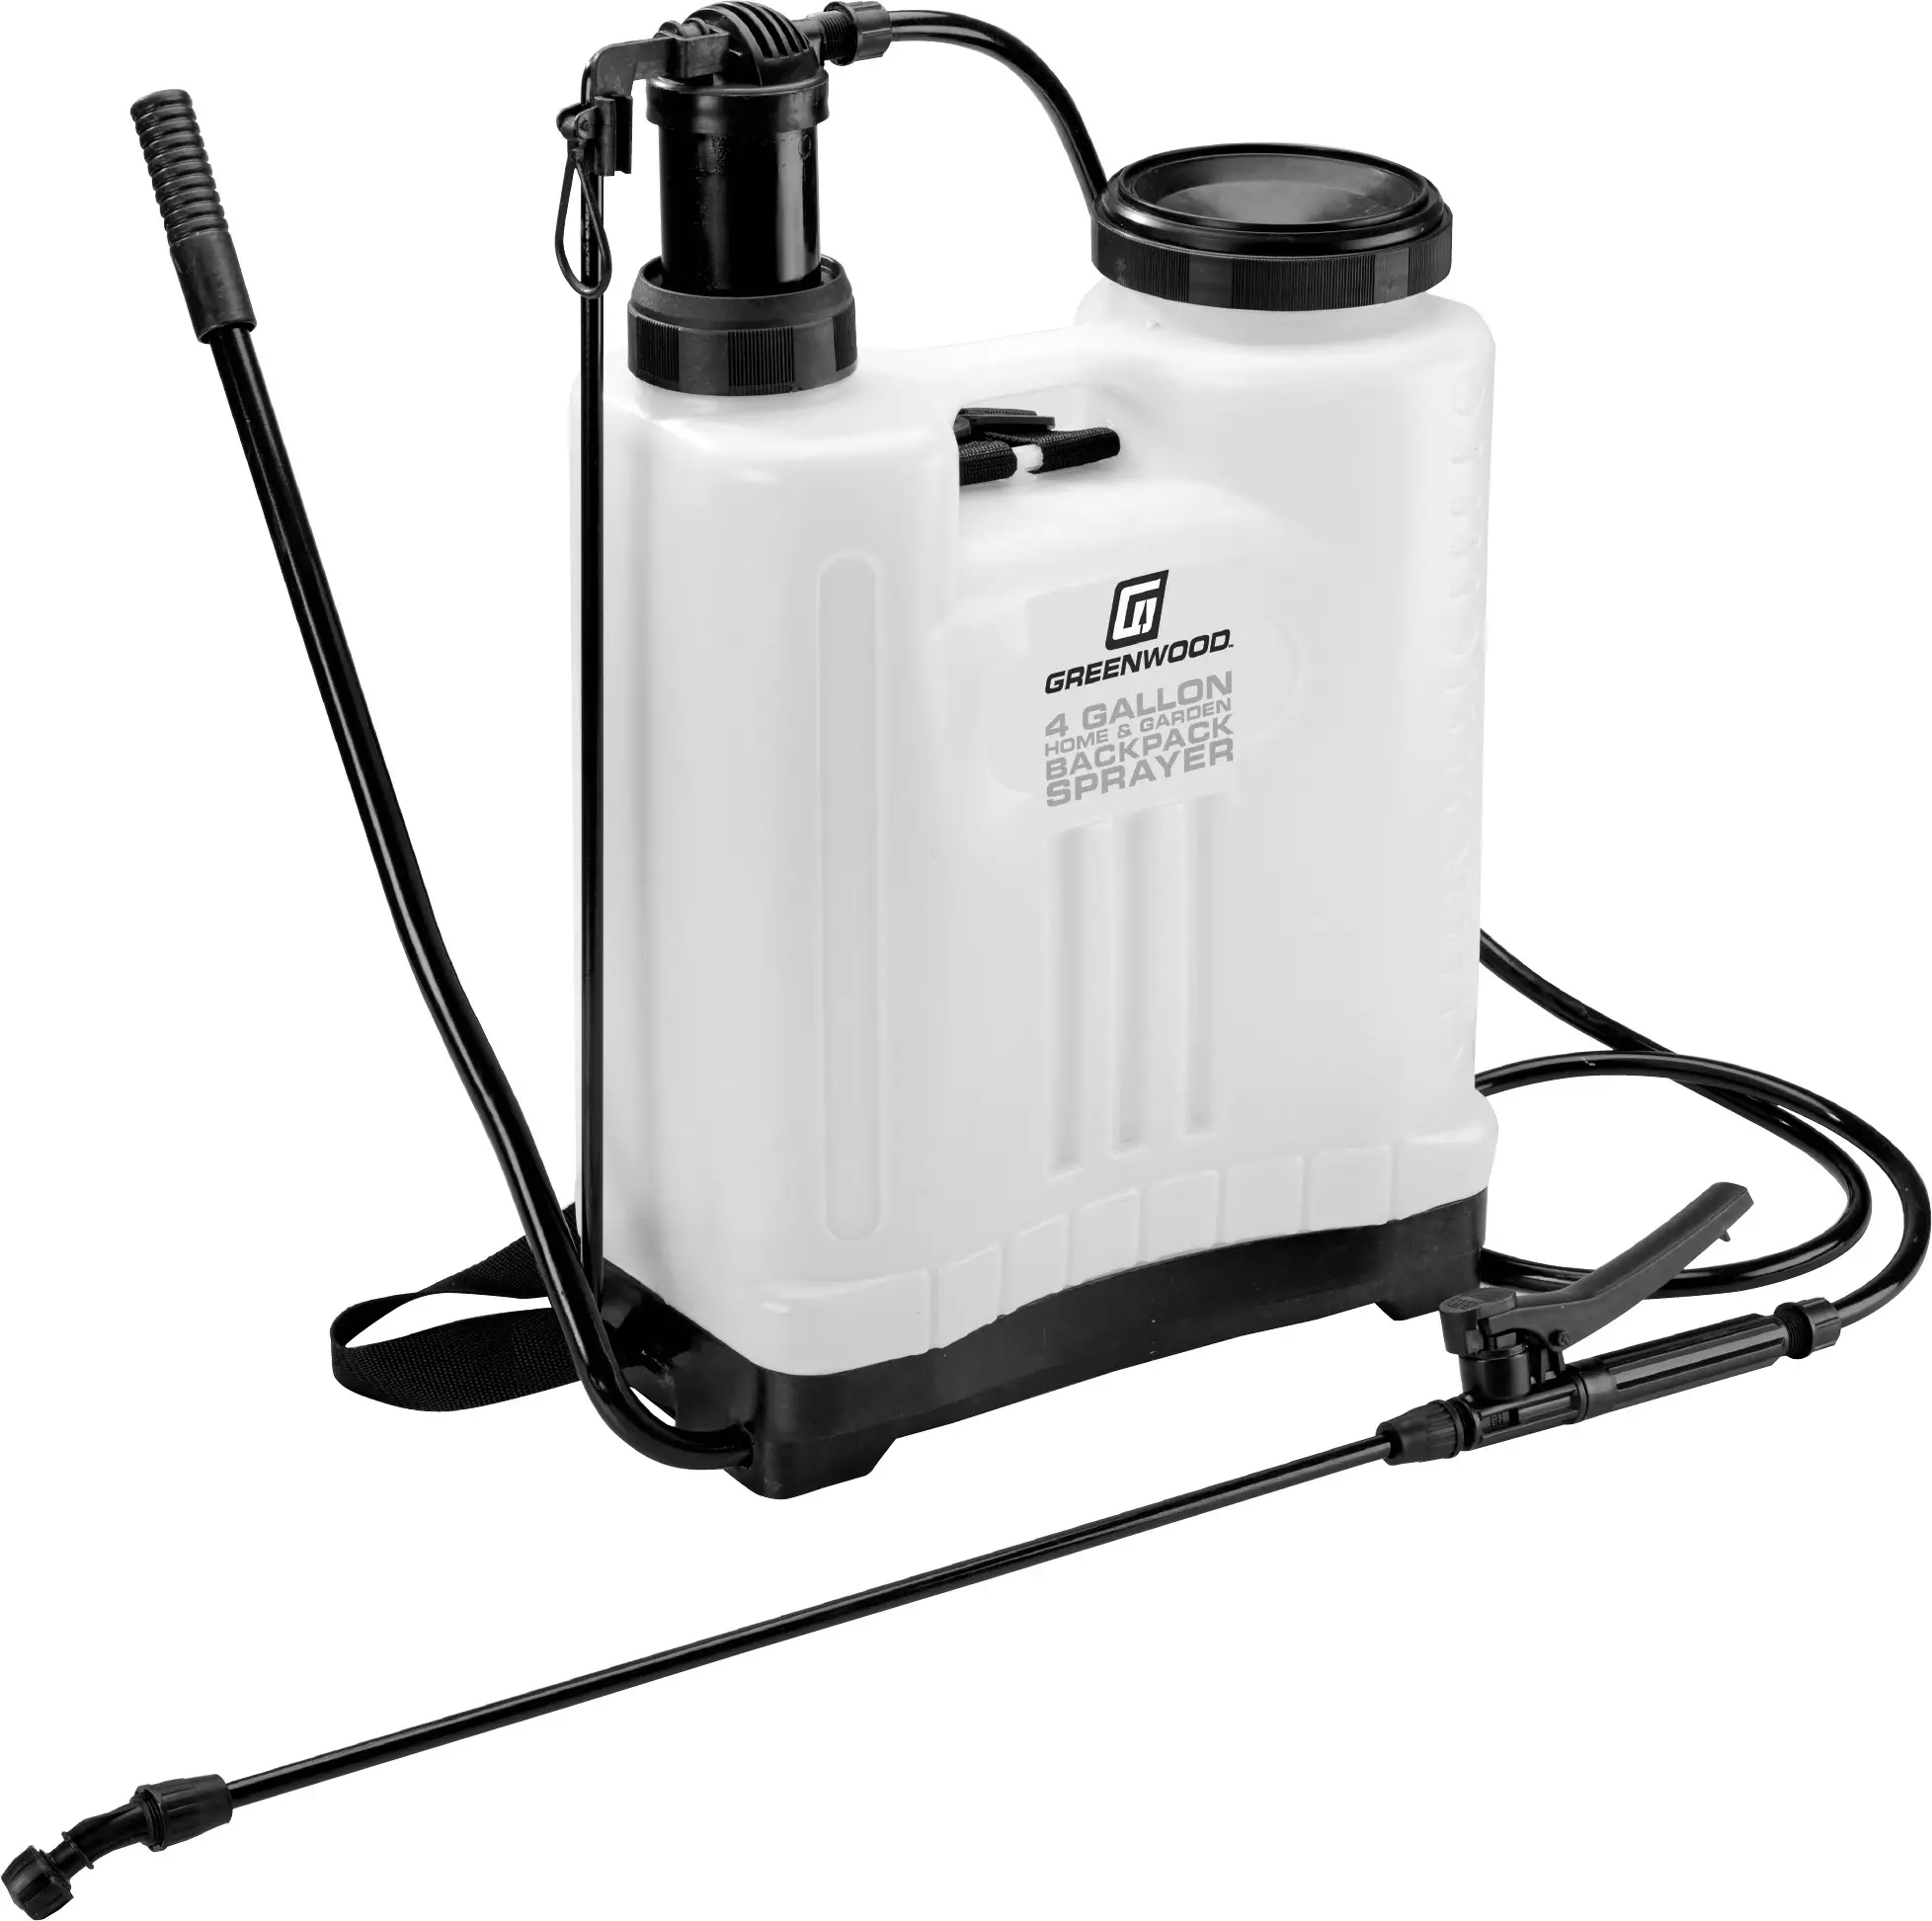 GREENWOOD-63092-4-Gallon-Home-and-Garden-Backpack-Sprayer-imagen-producto